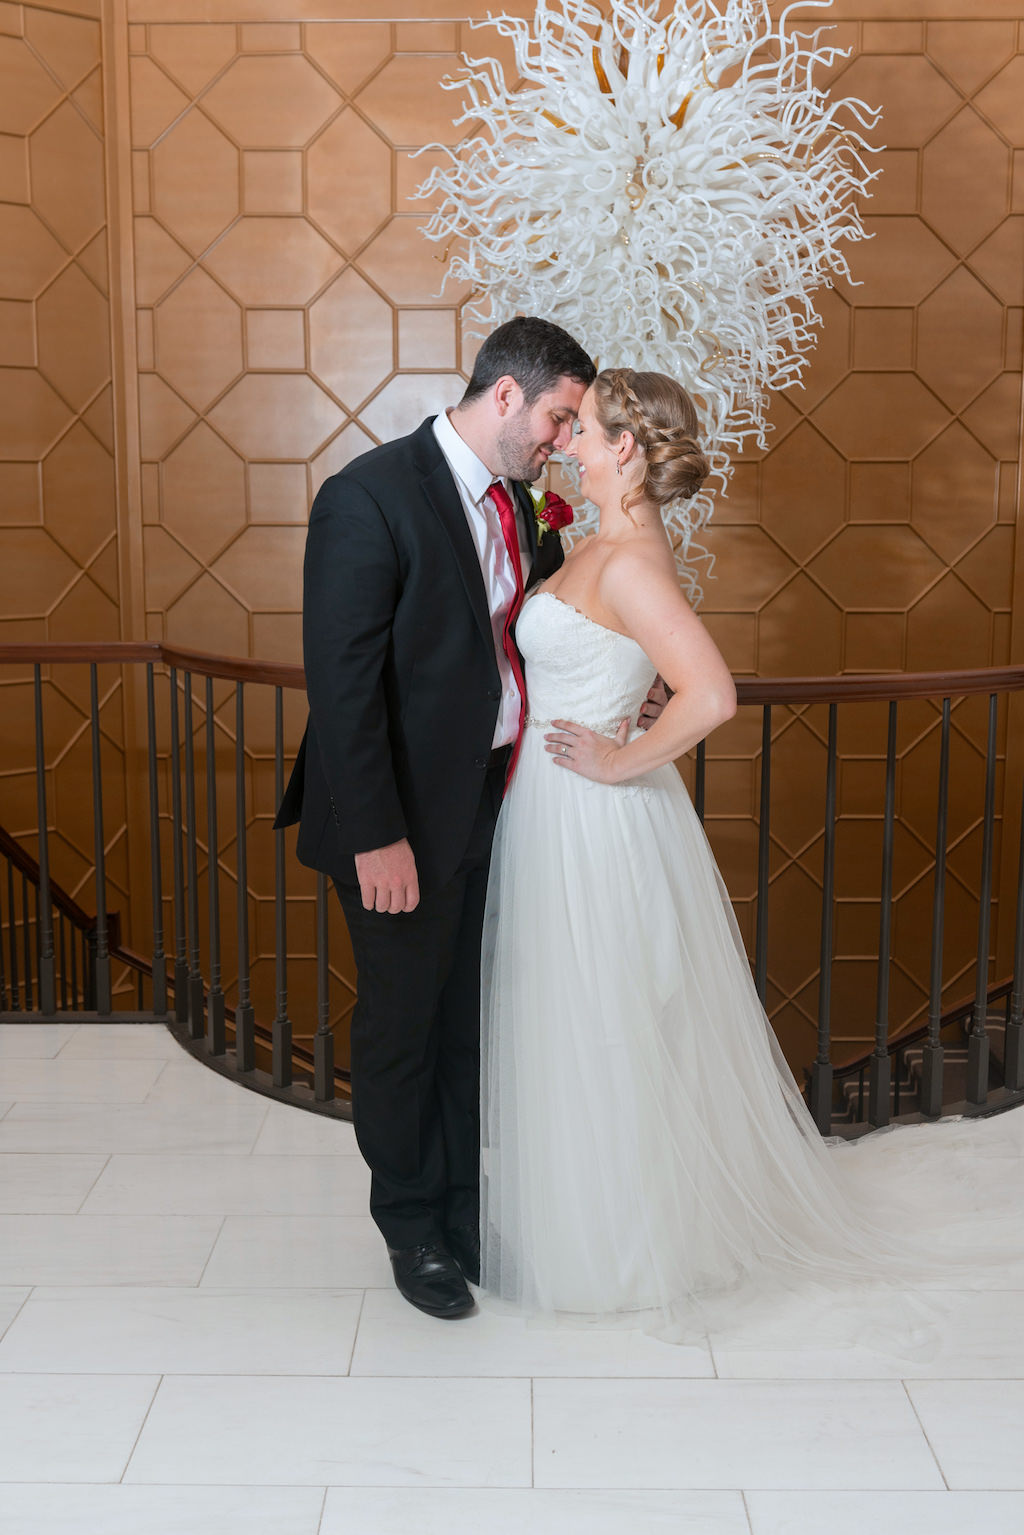 Indoor Wedding Portrait with Glass Chandelier, Bride in Strapless A Line Maggie Sottero Dress, Groom with Red Tie and Red Rose Boutonniere | Tampa Bay Wedding Photographer Carrie Wildes Photography | Downtown Wedding Venue The Tampa Club